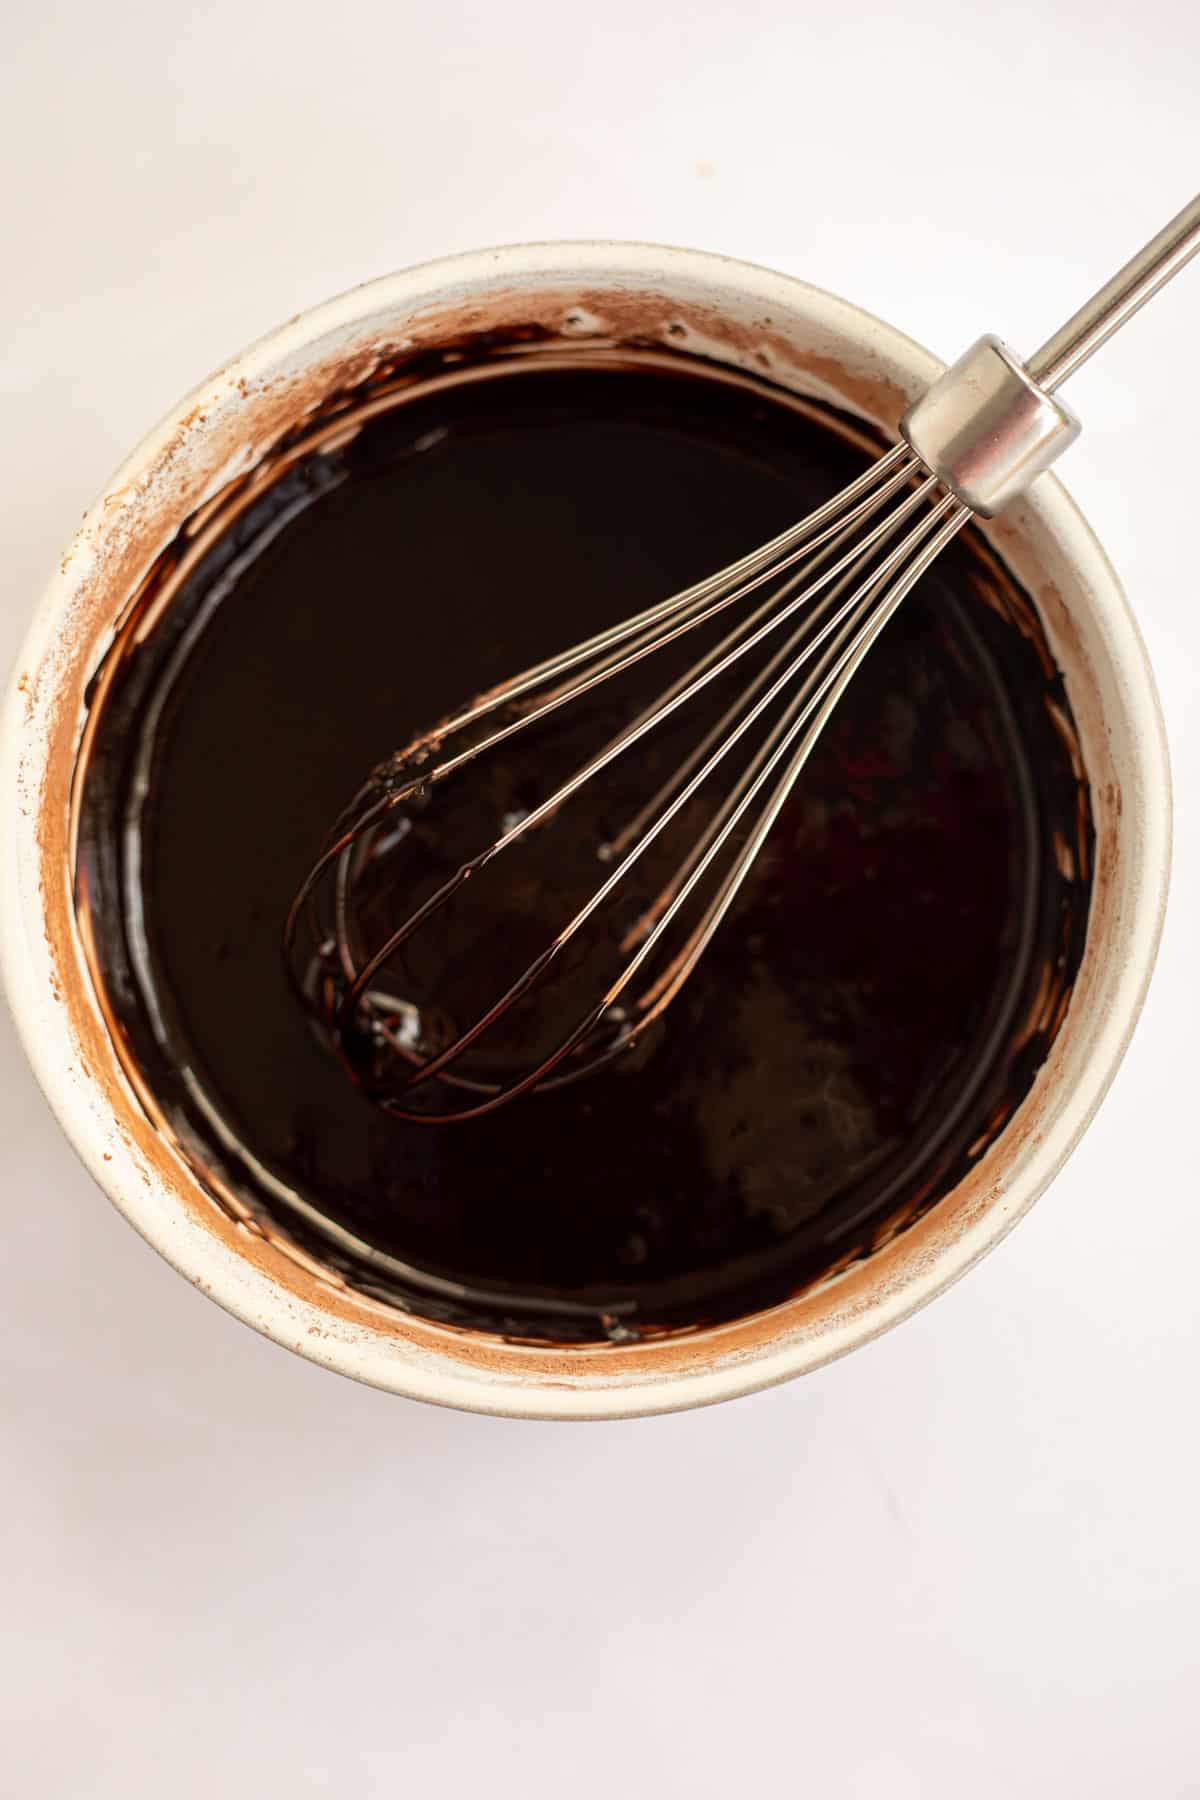 silky chocolate donut glaze whisked together in a white bowl.